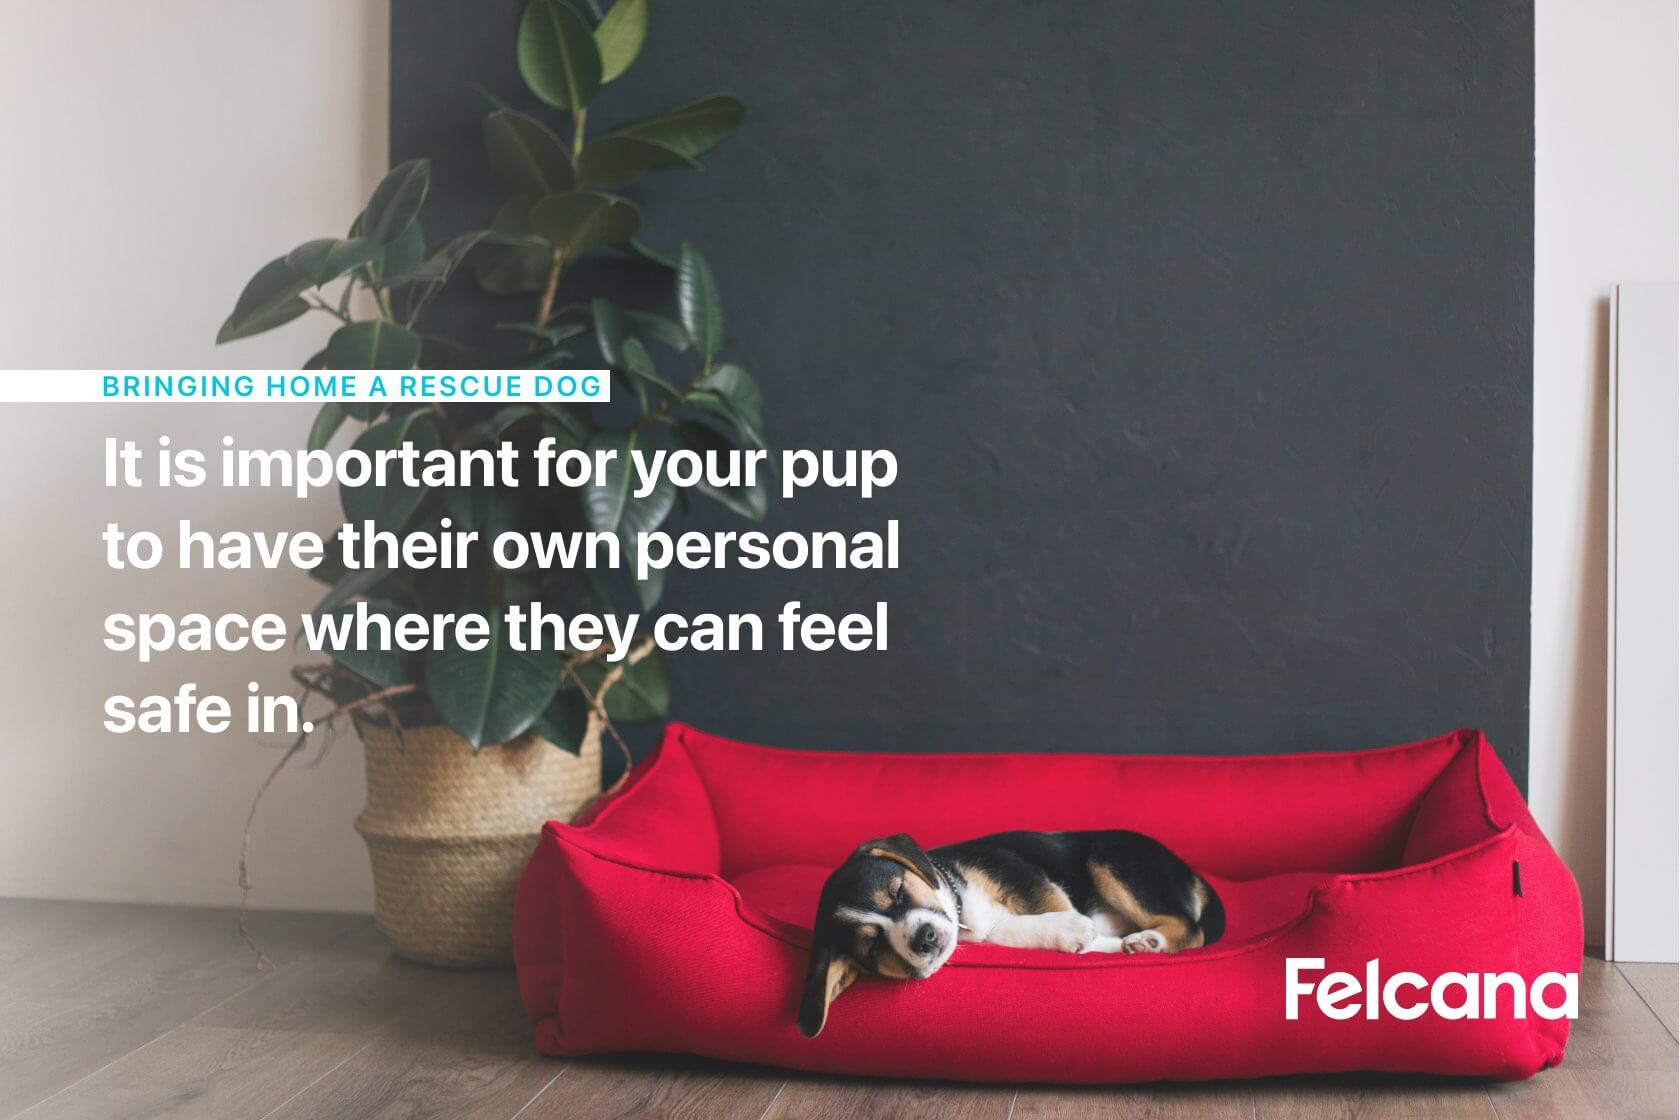 It is important for your pup to have their own personal space where they can feel safe in